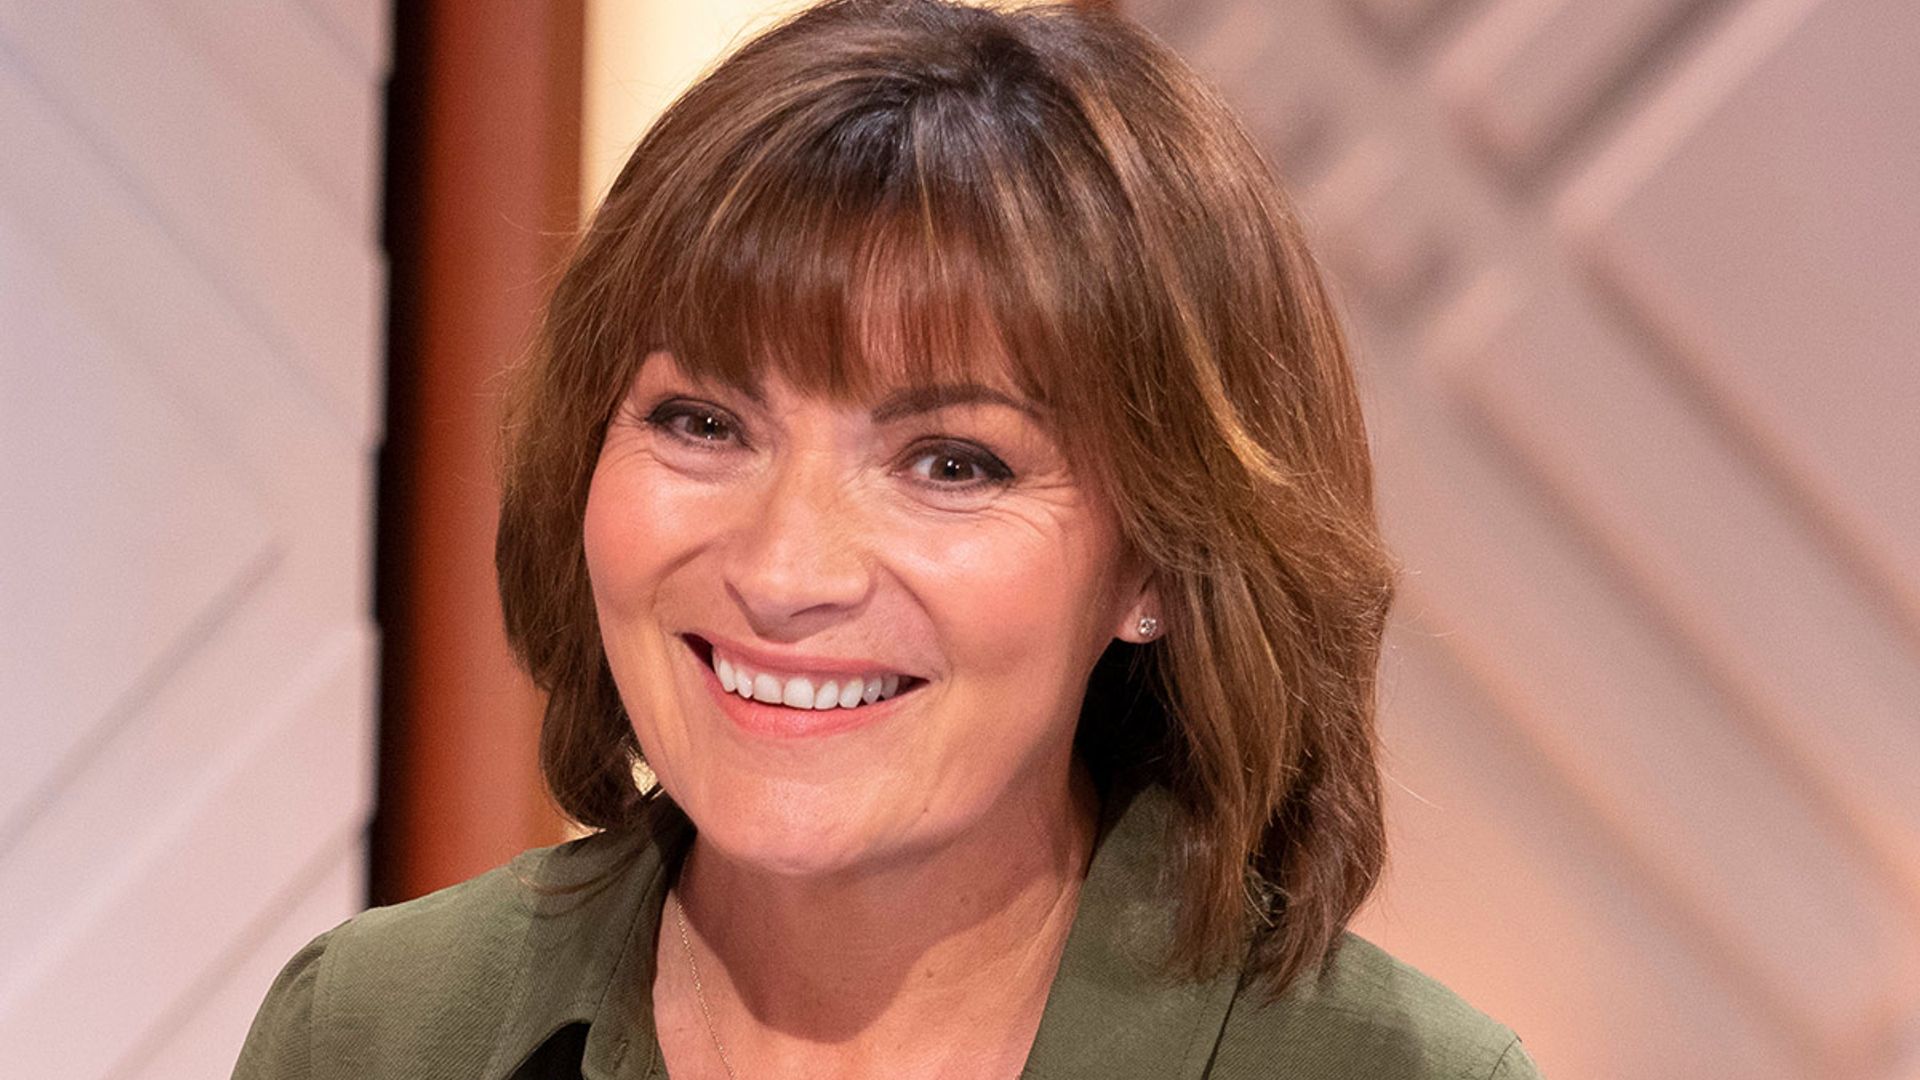 lorraine kelly's latest floral dress has got to be her most